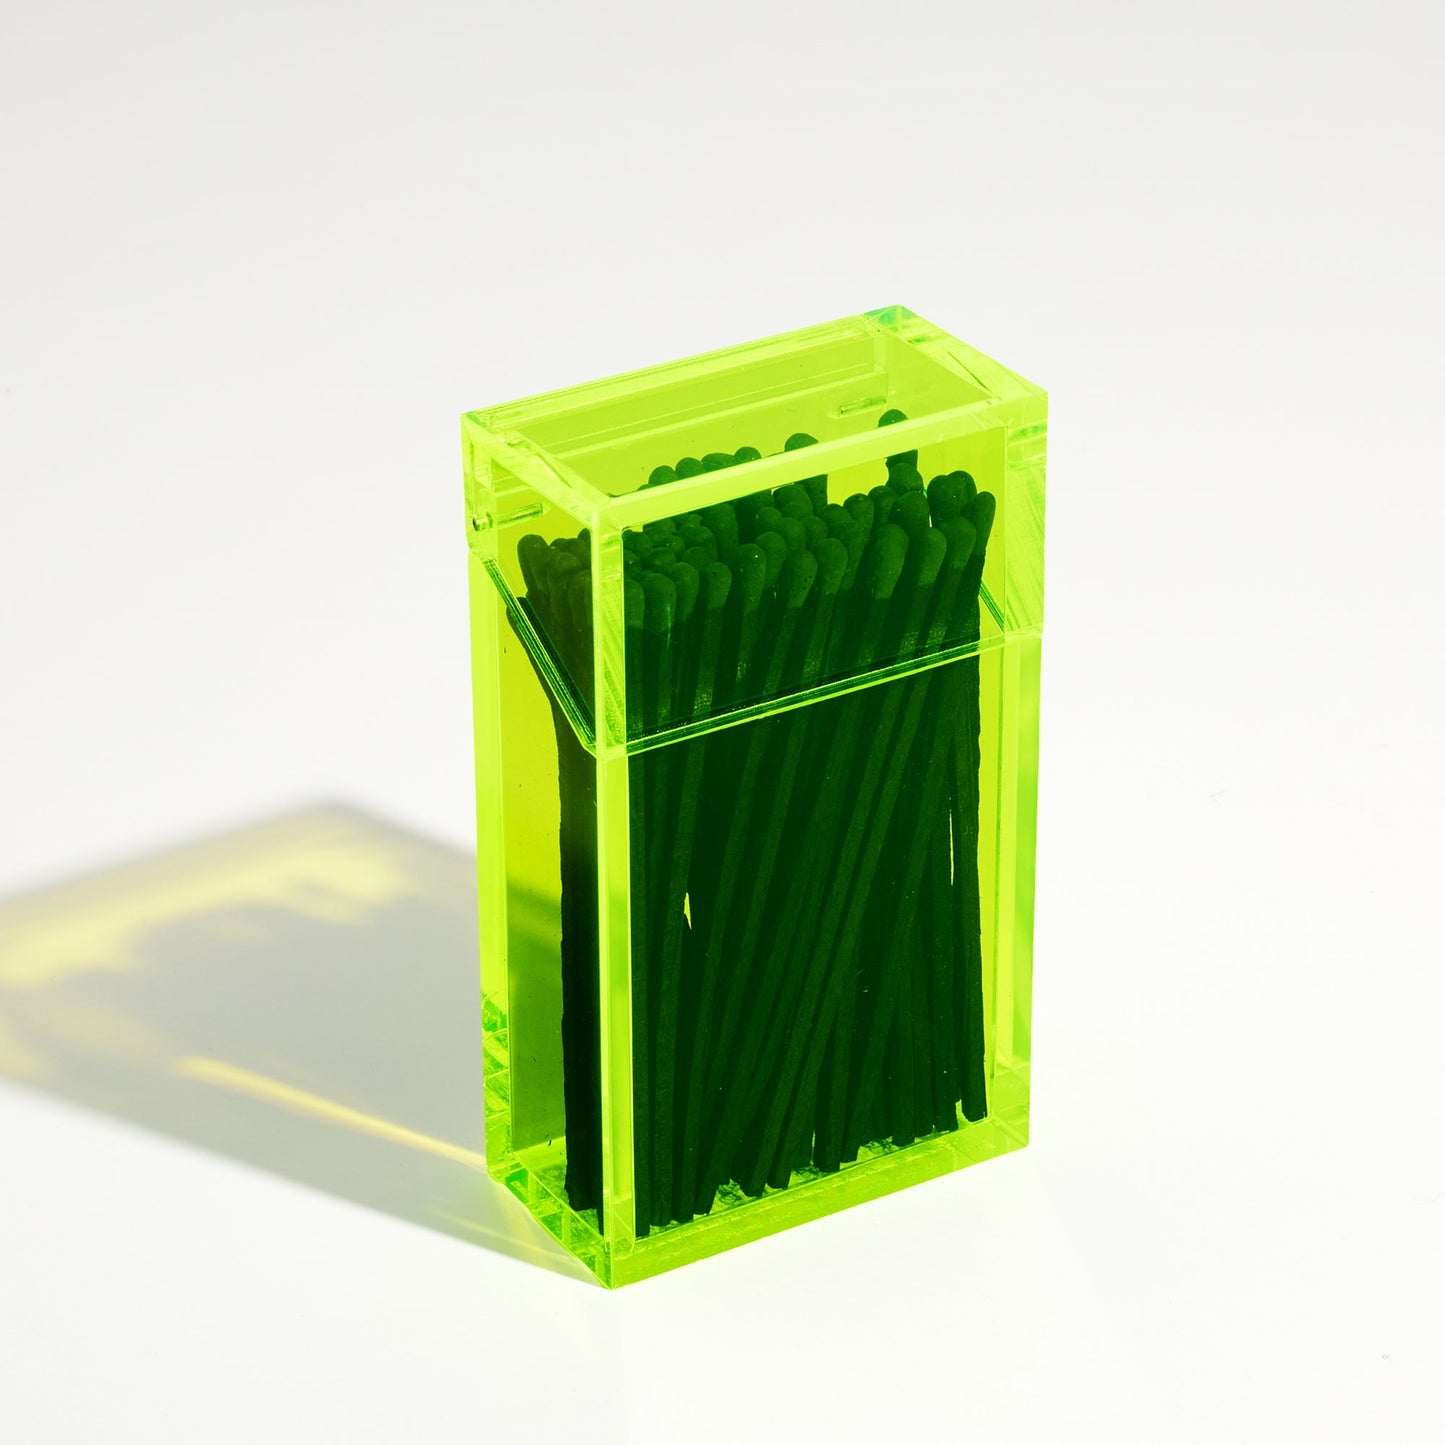 Closed Opened Match holder shaped like a Cigarette Case. Made with neon green acrylic. Case holds Black matches in it.